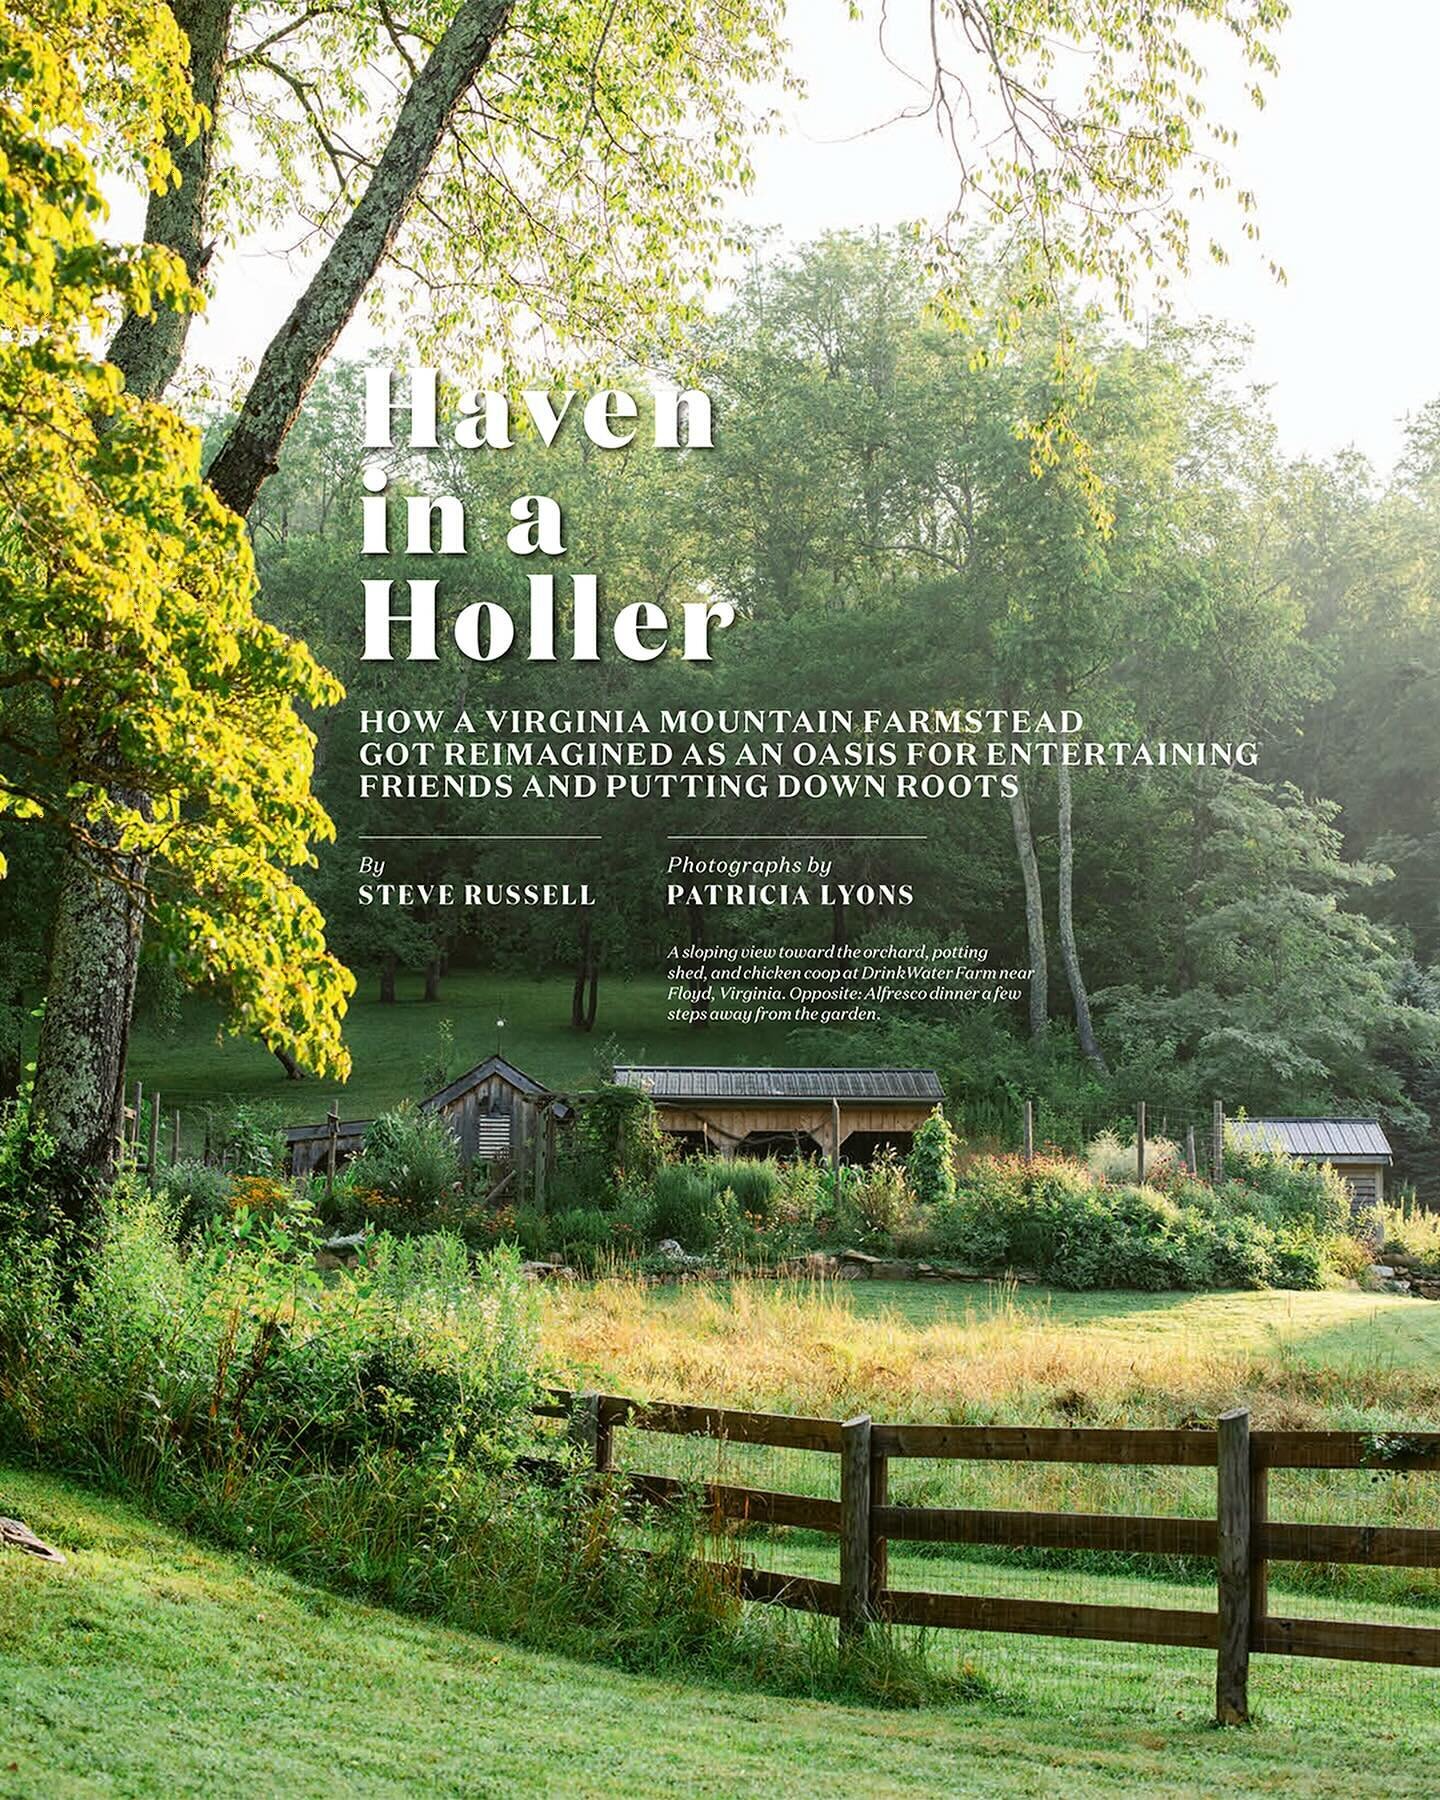 When I got the call from @gardenandgun to photograph Frank and Wade&rsquo;s garden in the hills of Floyd, Virginia, for the January issue, we were offered their guest cottage to stay on property as the farm was tucked a ways from town. We accepted an